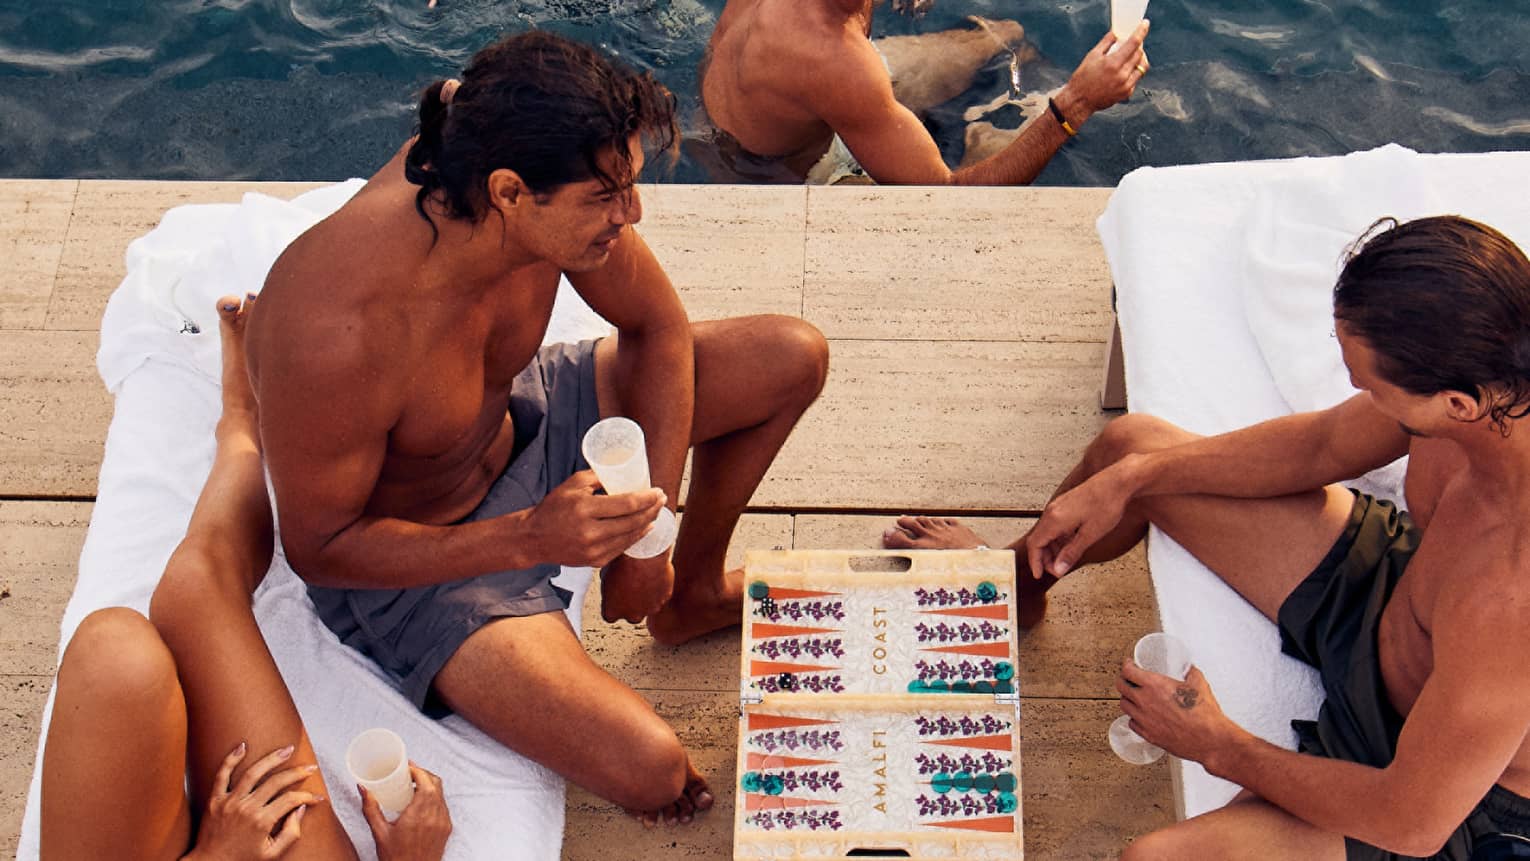  A group of people plying games and swimming.